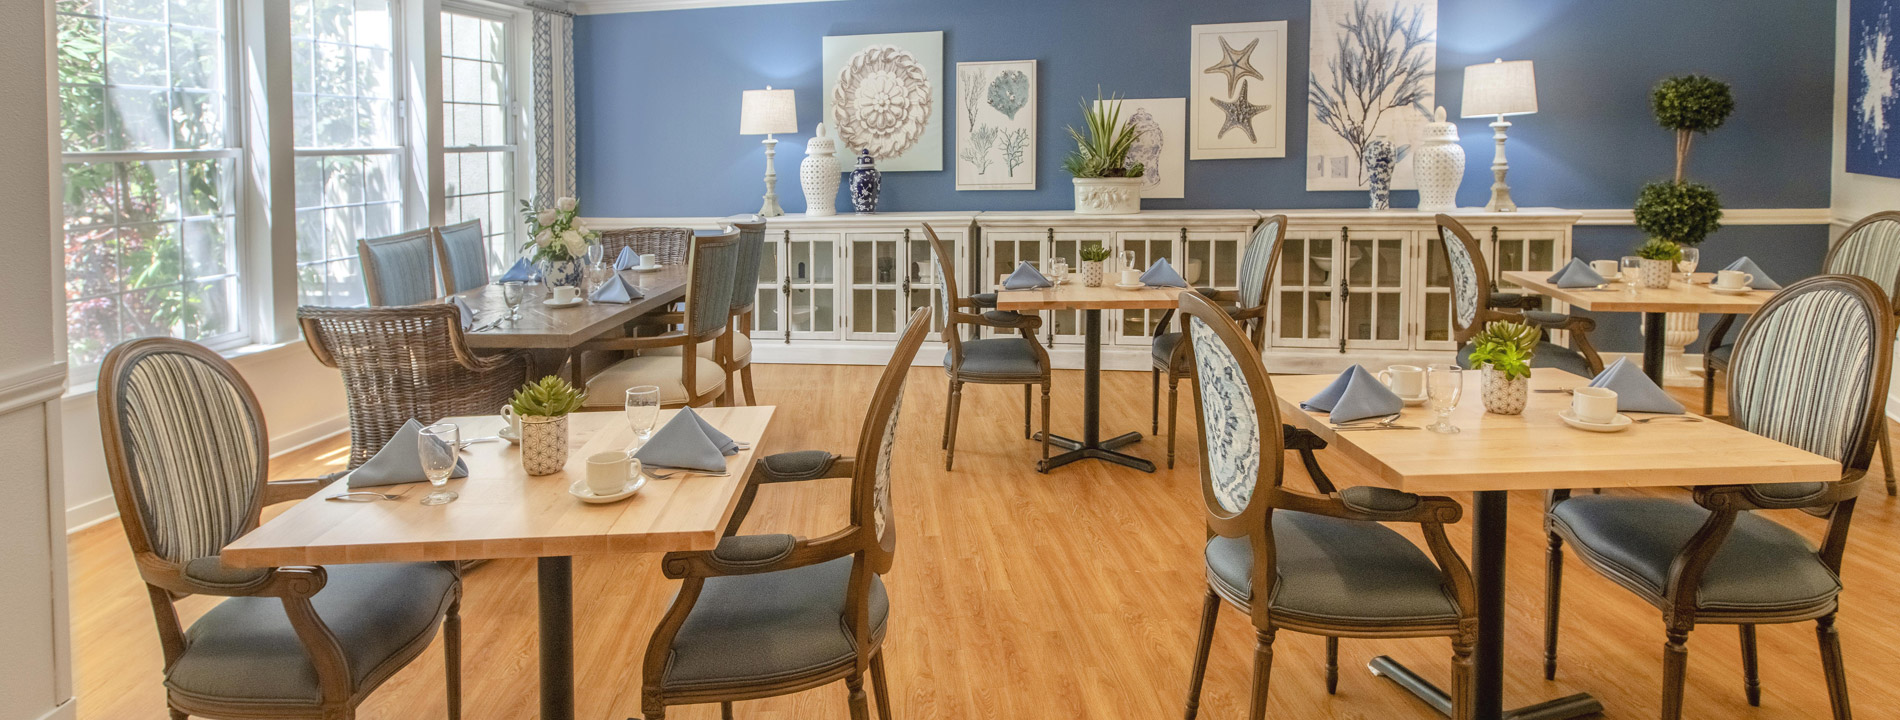 casual dining area with set tables